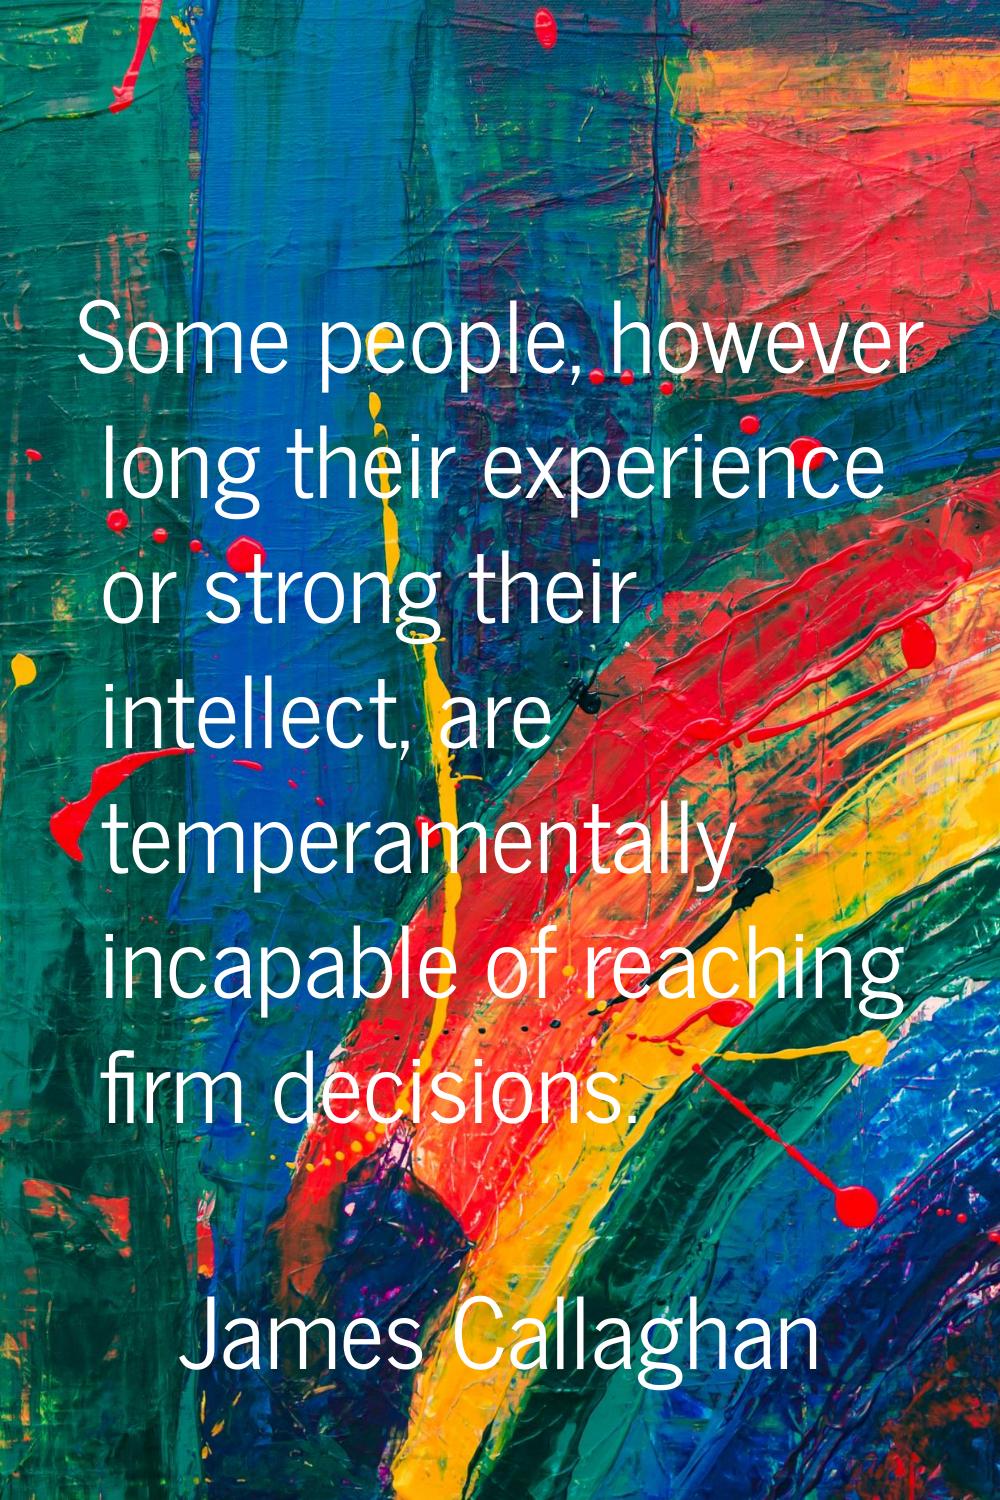 Some people, however long their experience or strong their intellect, are temperamentally incapable